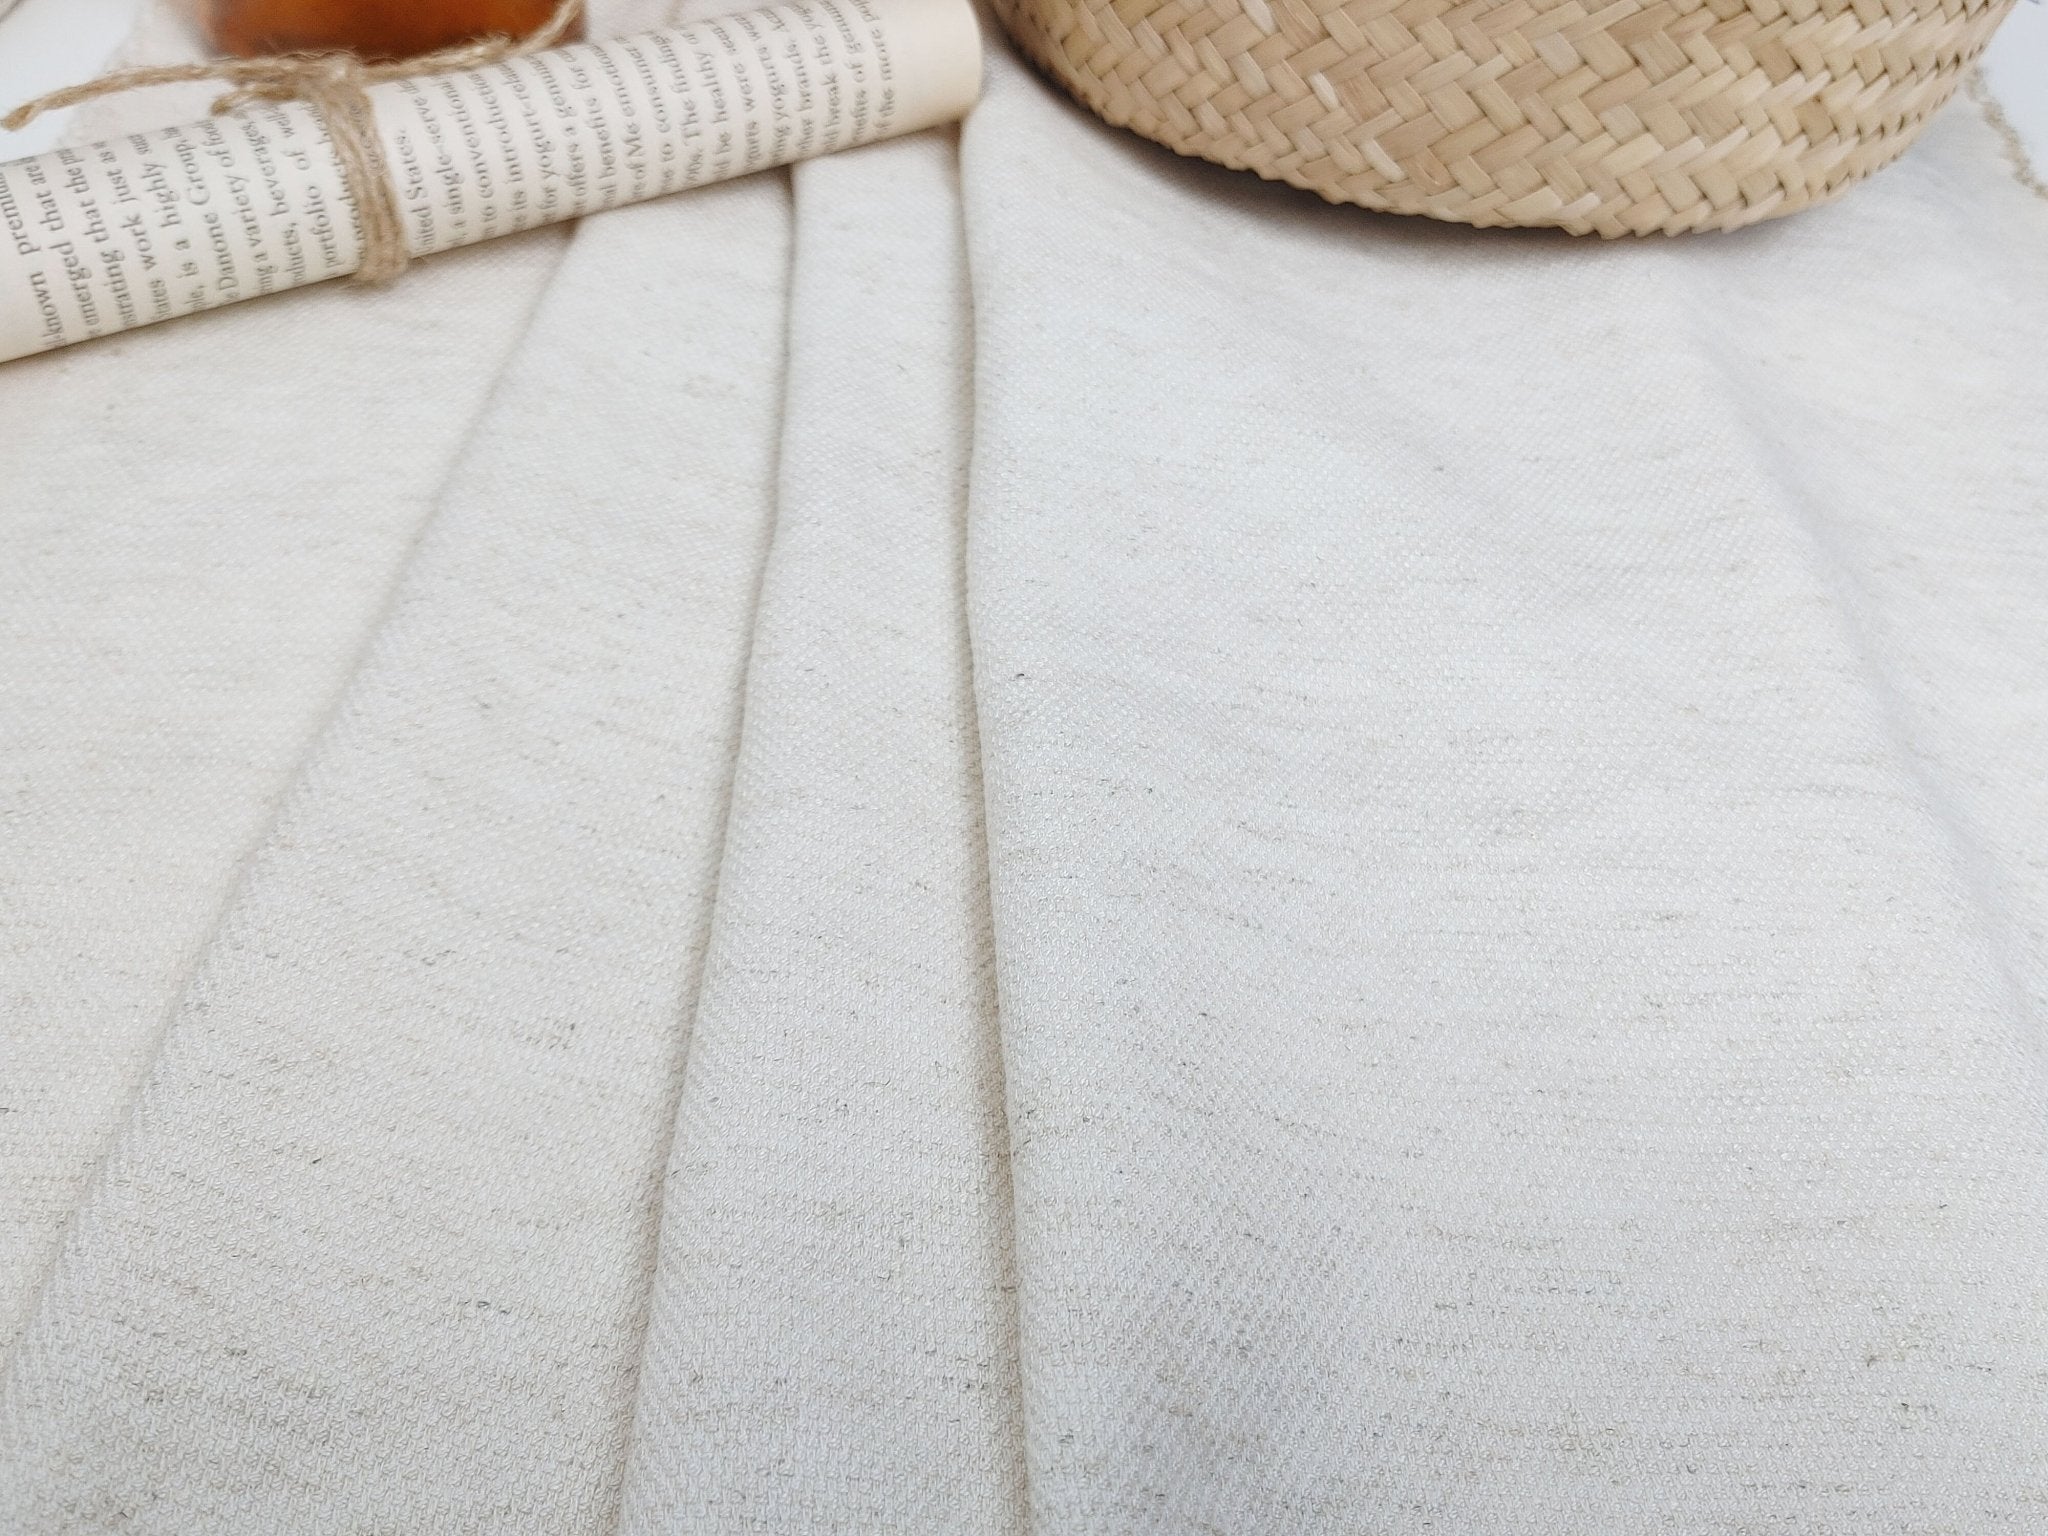 Heavy Weight Linen Rayon Stretch Fabric with Dobby Weave and Excellent Drape 6317 6414 6874 7229 - The Linen Lab - Natural(Light)